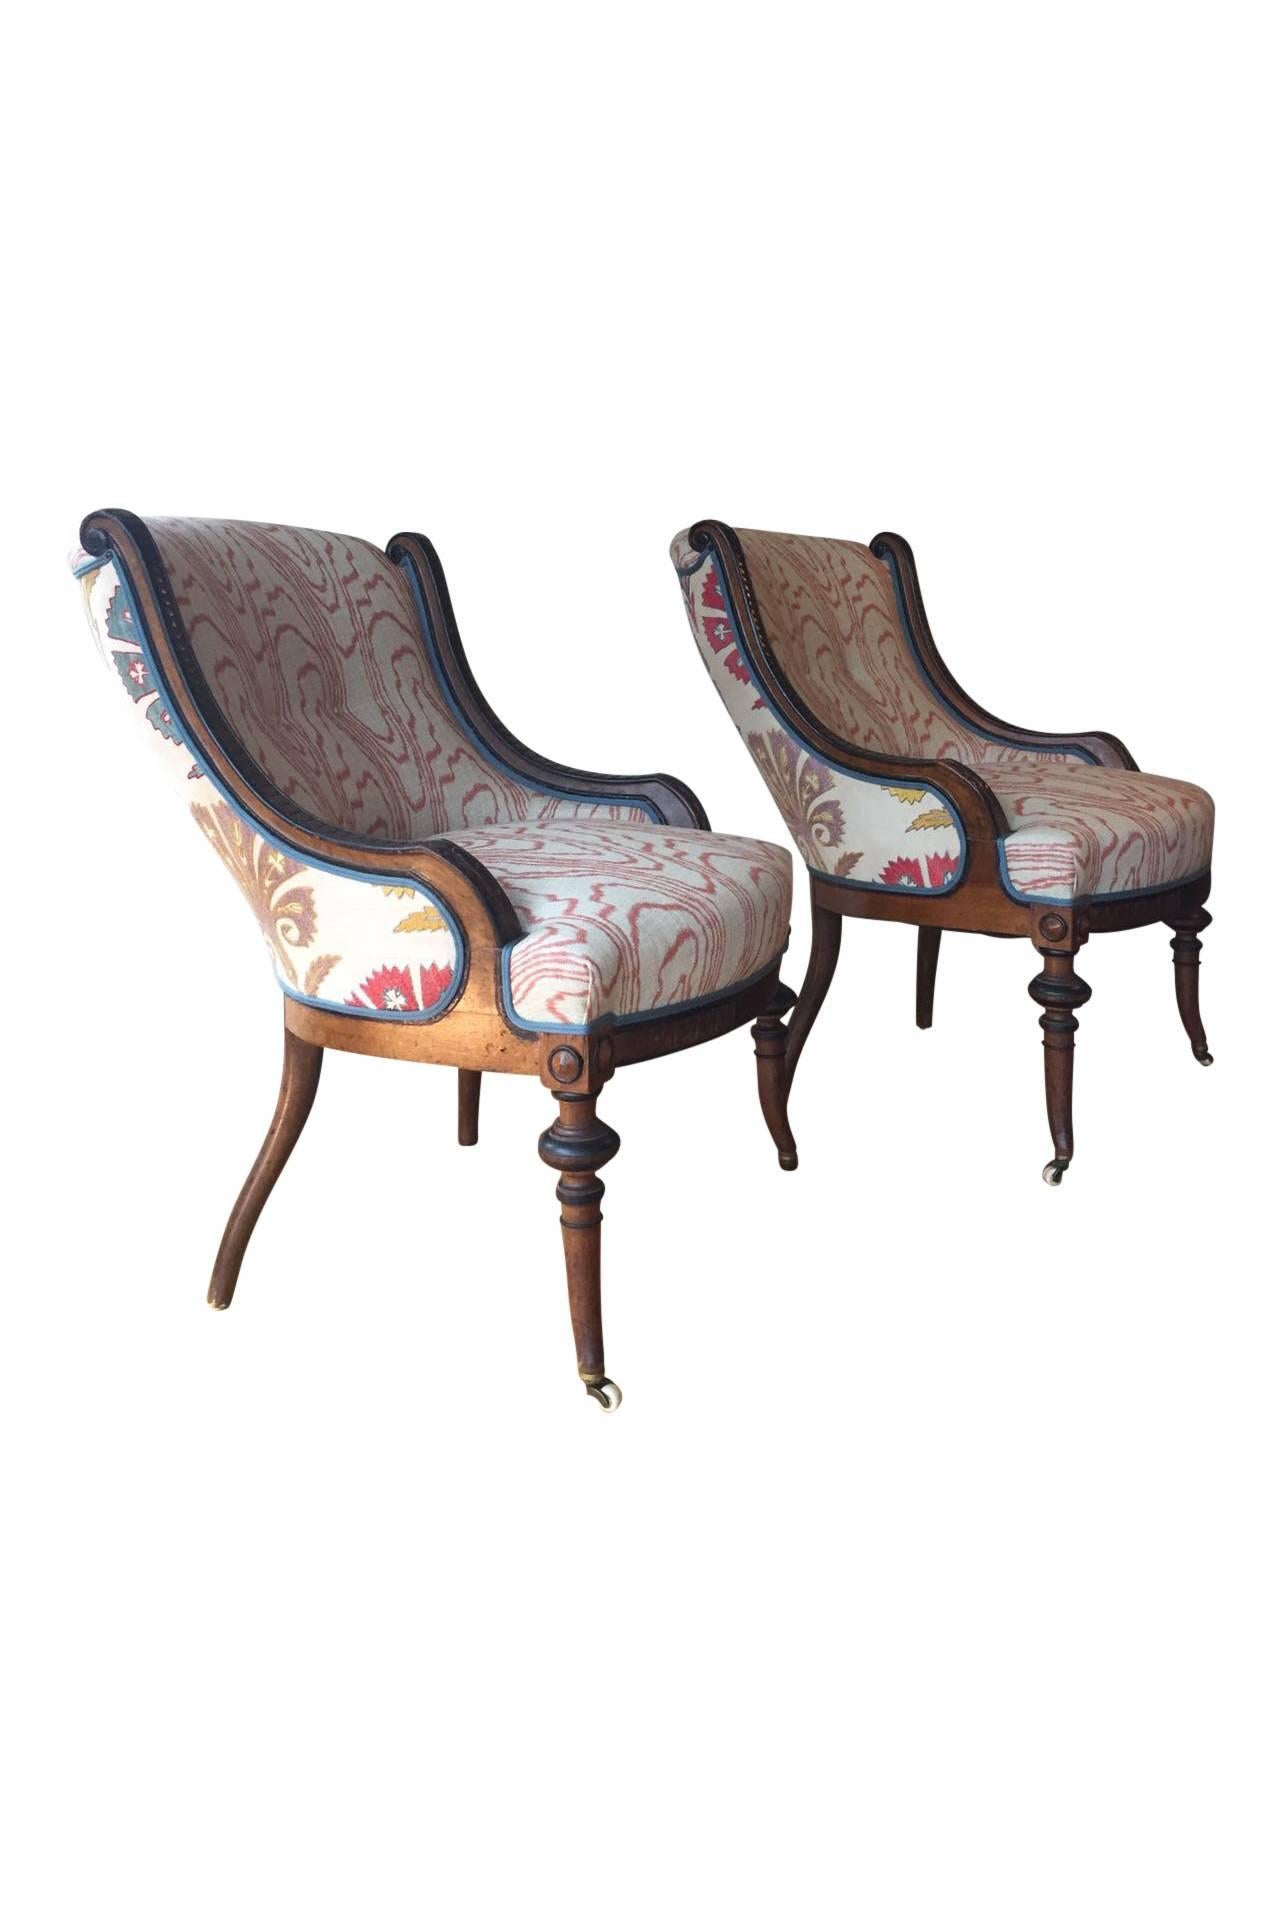 MOMIQ chairs 'IKIZ': this is a set of two Victorian walnut nursing chairs with carved wood on the sides.

At the end of the 17th century the introduction of walnut furniture started which has the advantage of being able to fit in with more modern